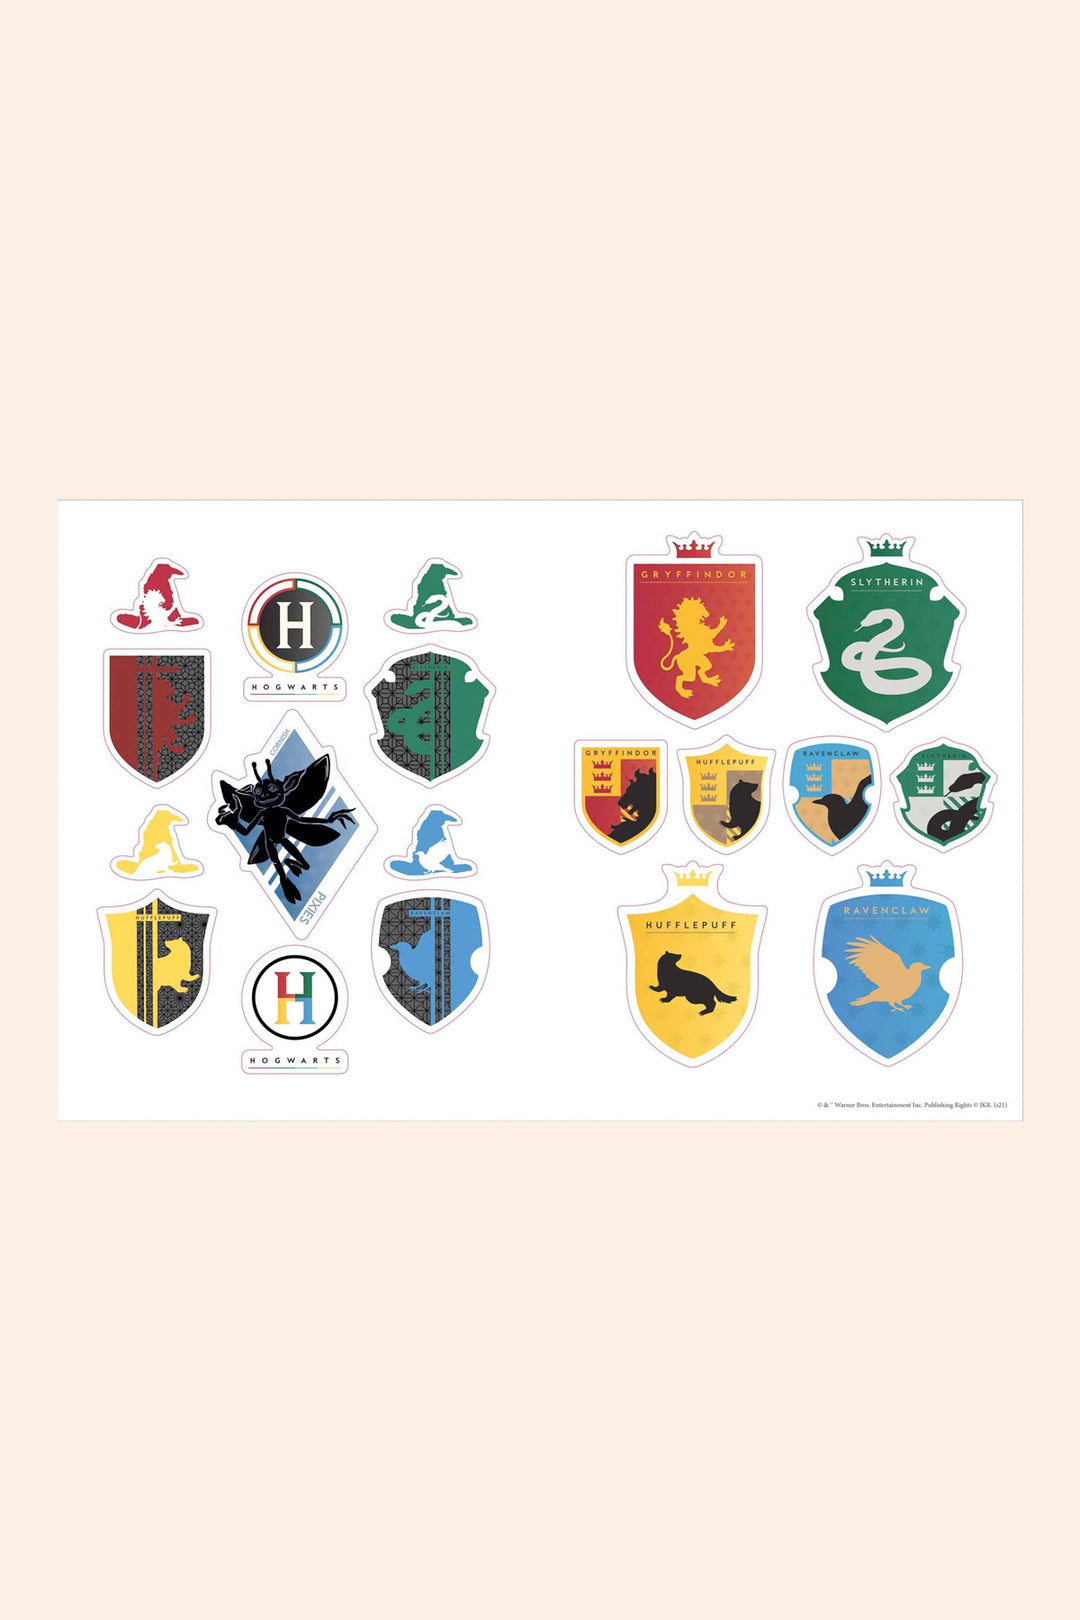 Harry Potter - World of Stickers